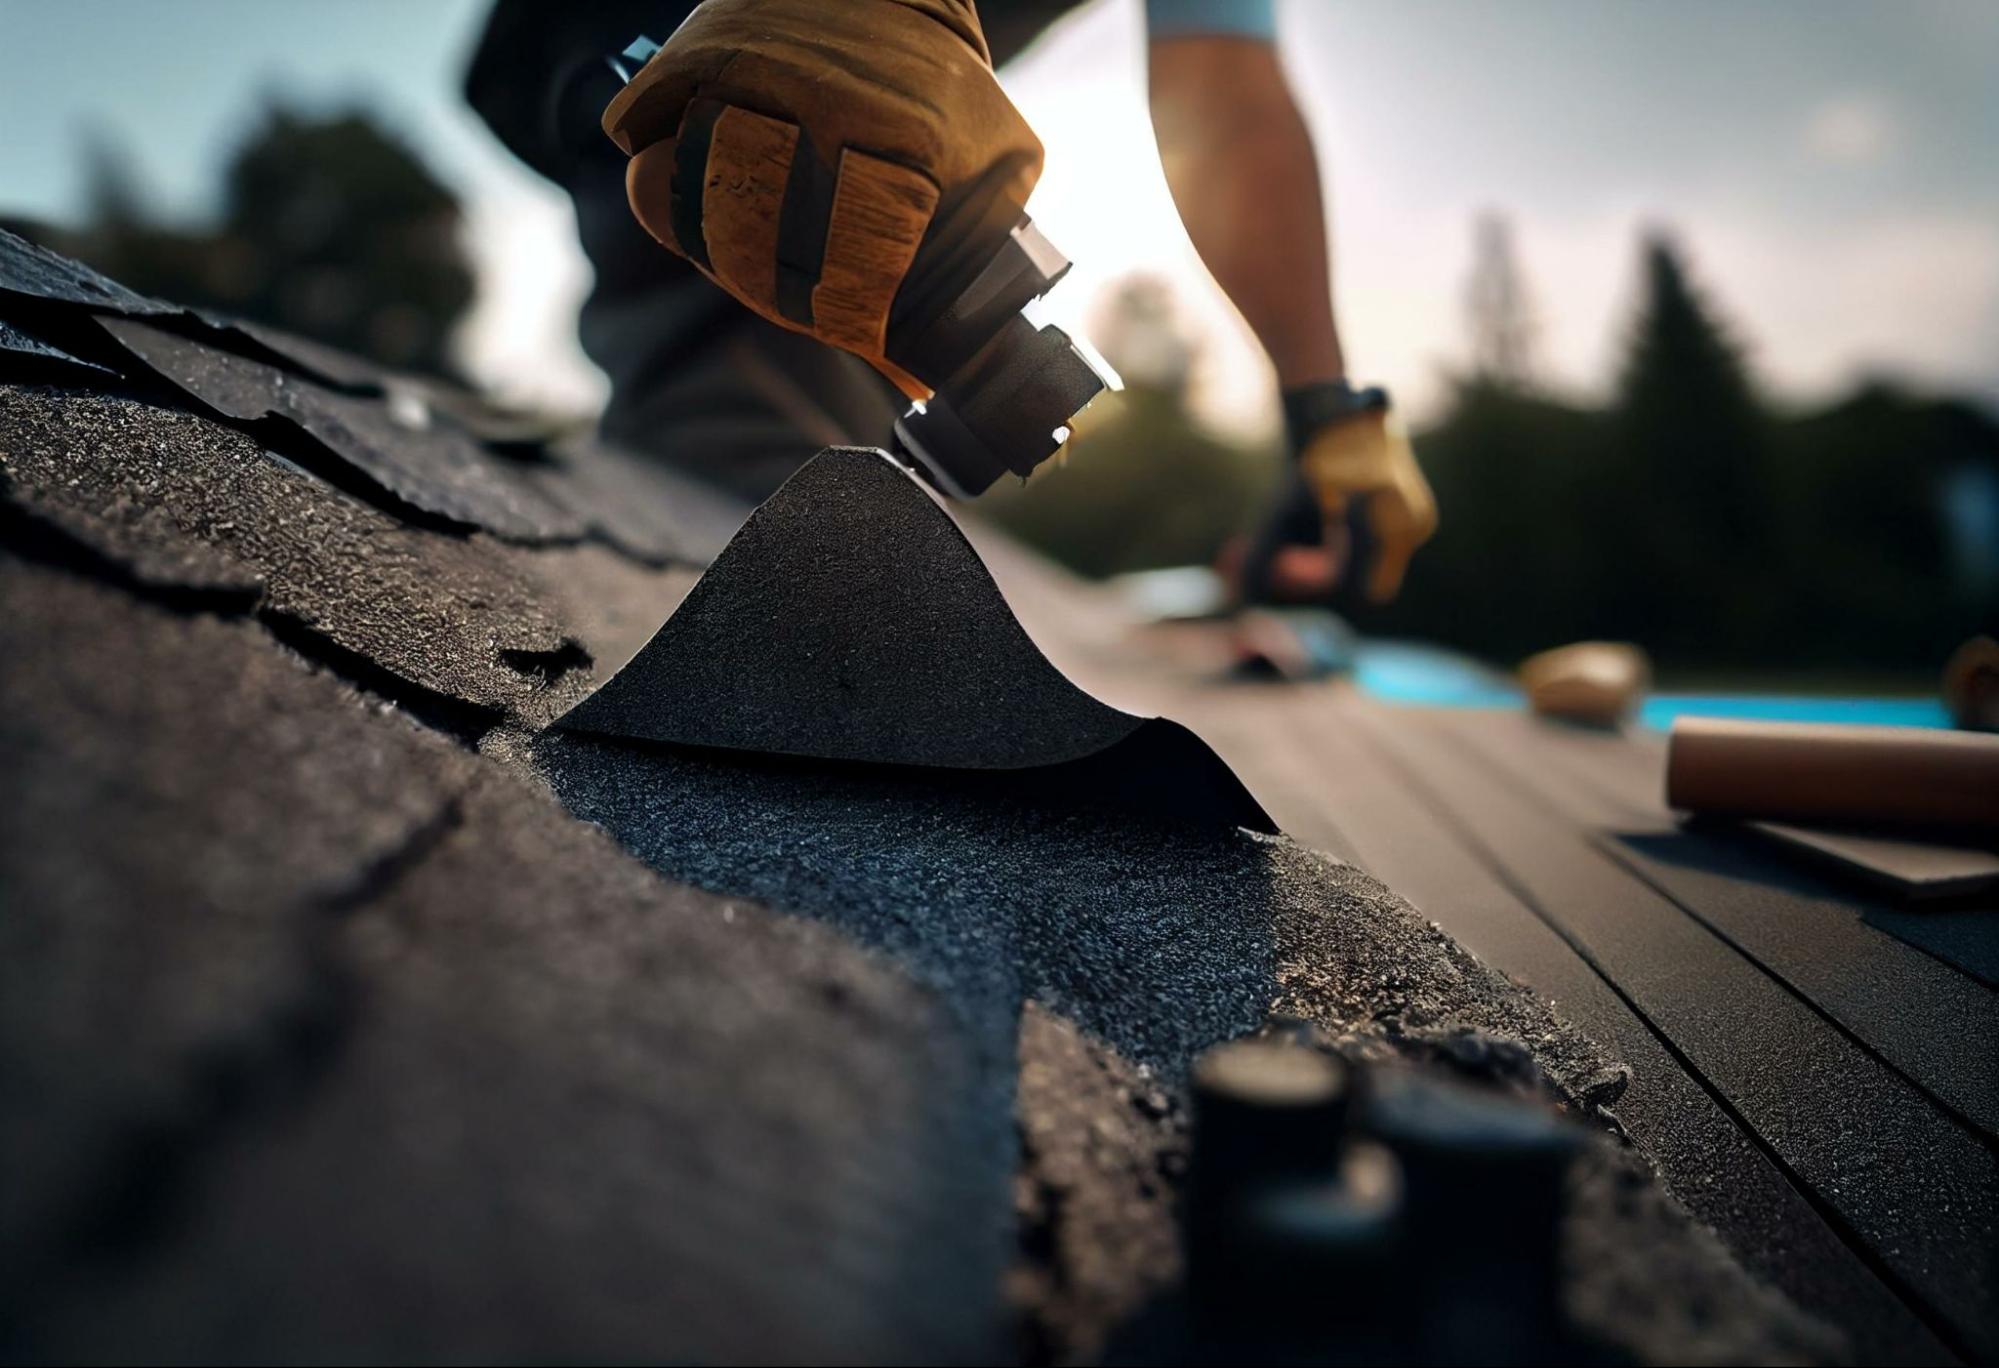 15 Crucial Questions To Ask Before Hiring A Roofing Contractor